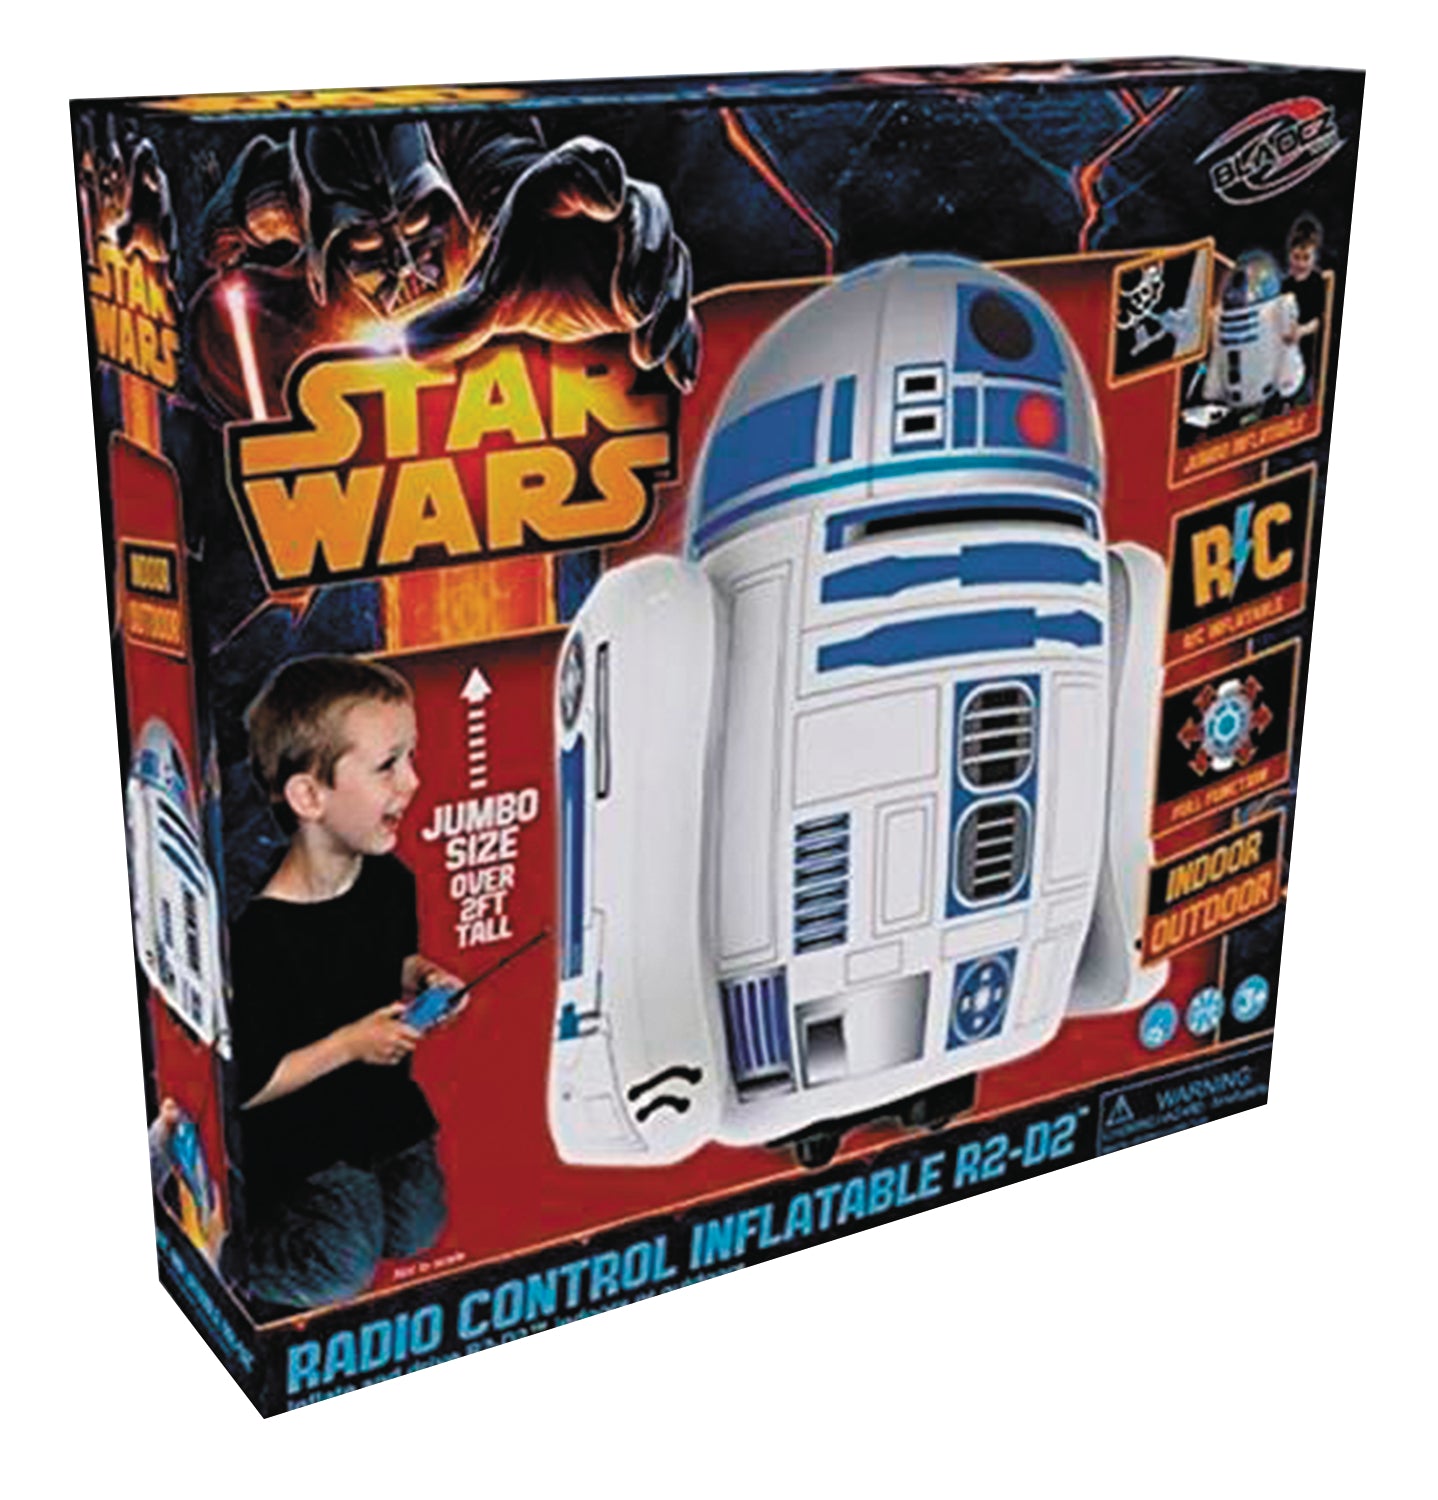 Star Wars 13 1/2 inch Inflatable battery operated Remote Control R2-D2